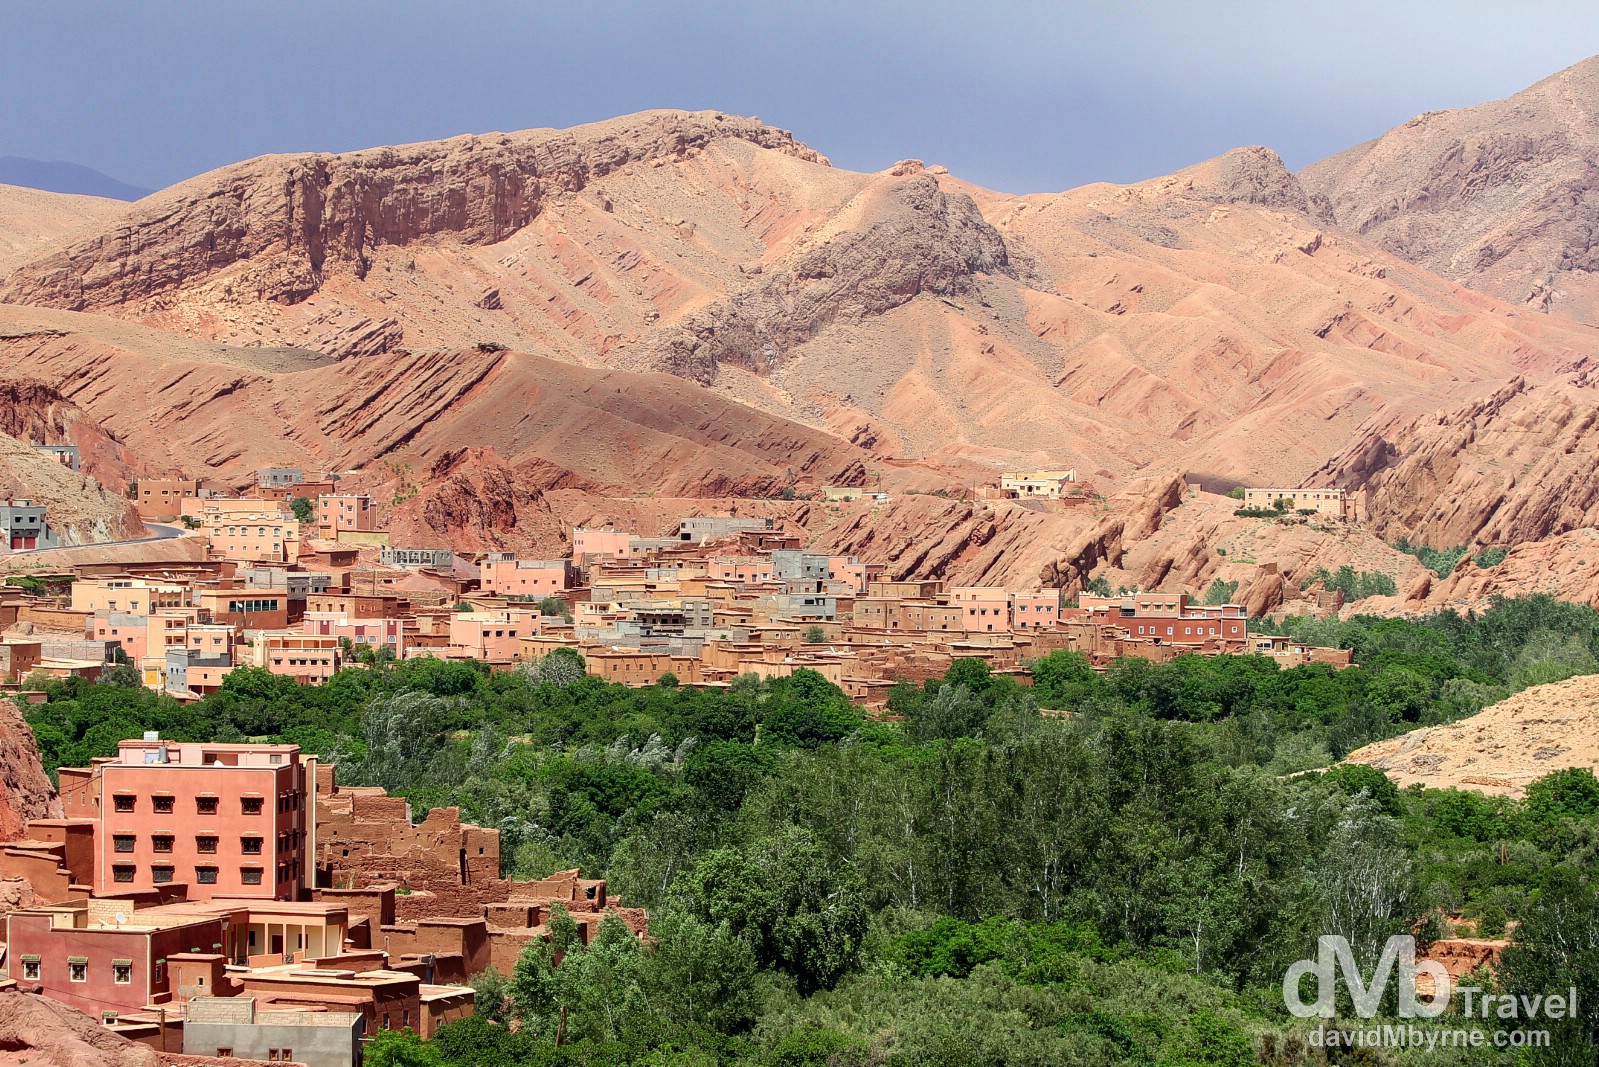 The landscape in a section of Dades Gorge, Morocco. May 15th, 2014.